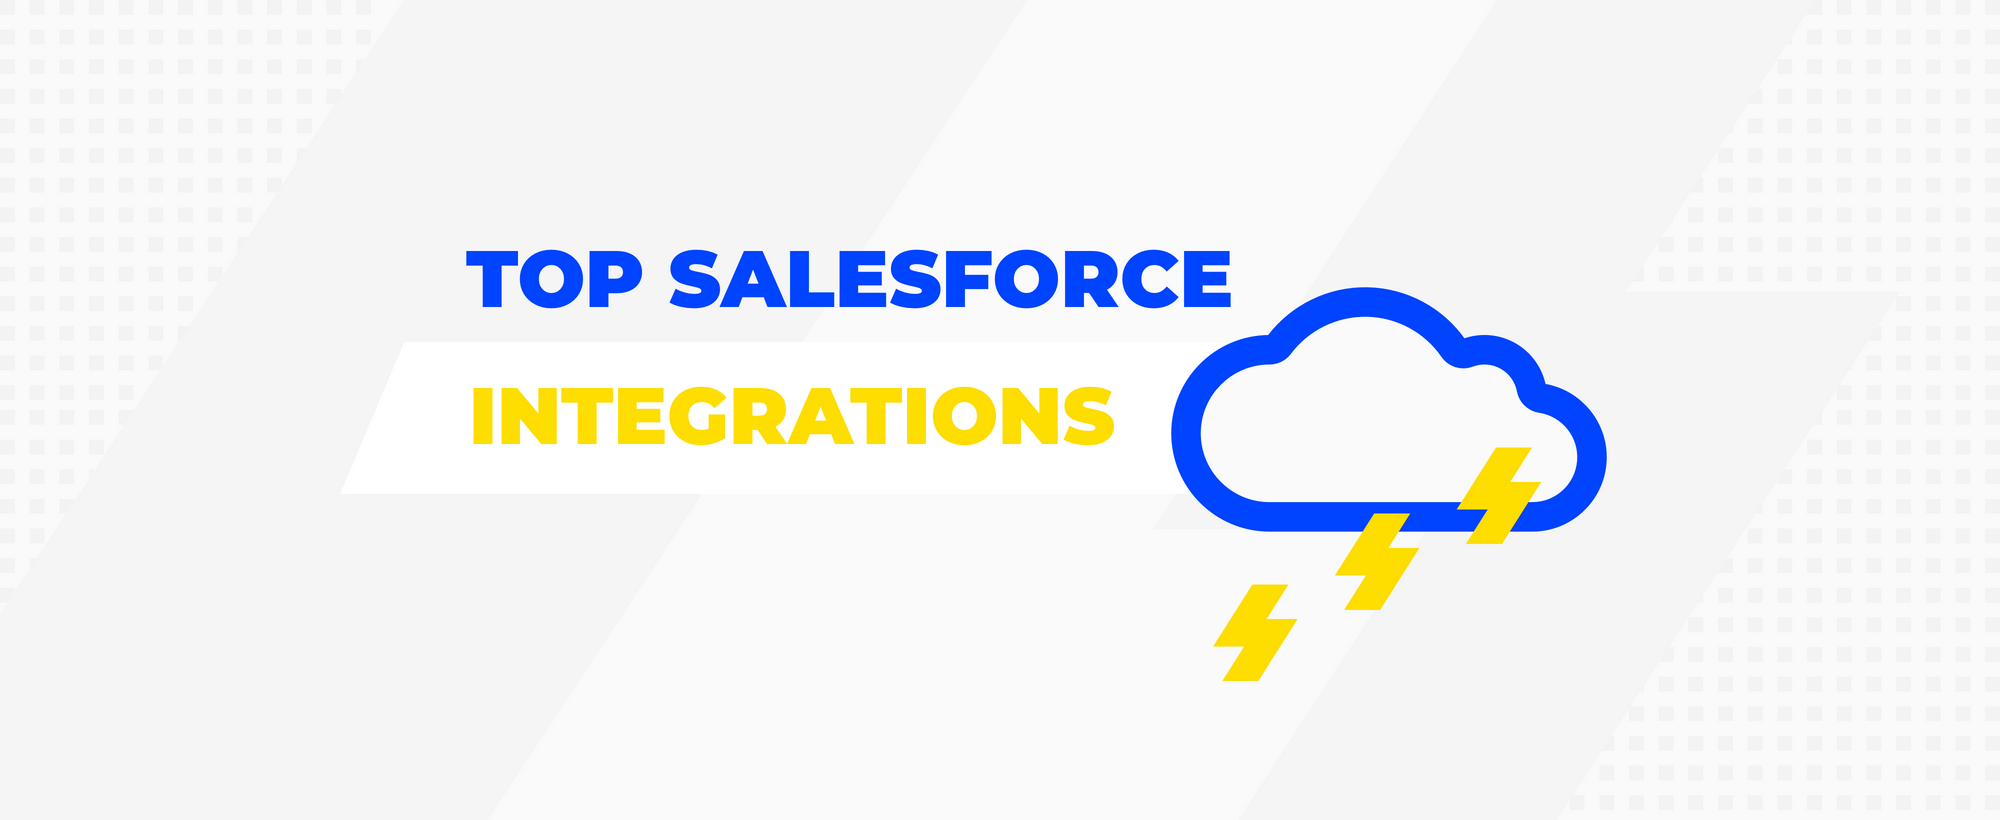 Top Salesforce Integrations You Need To Know in 2023